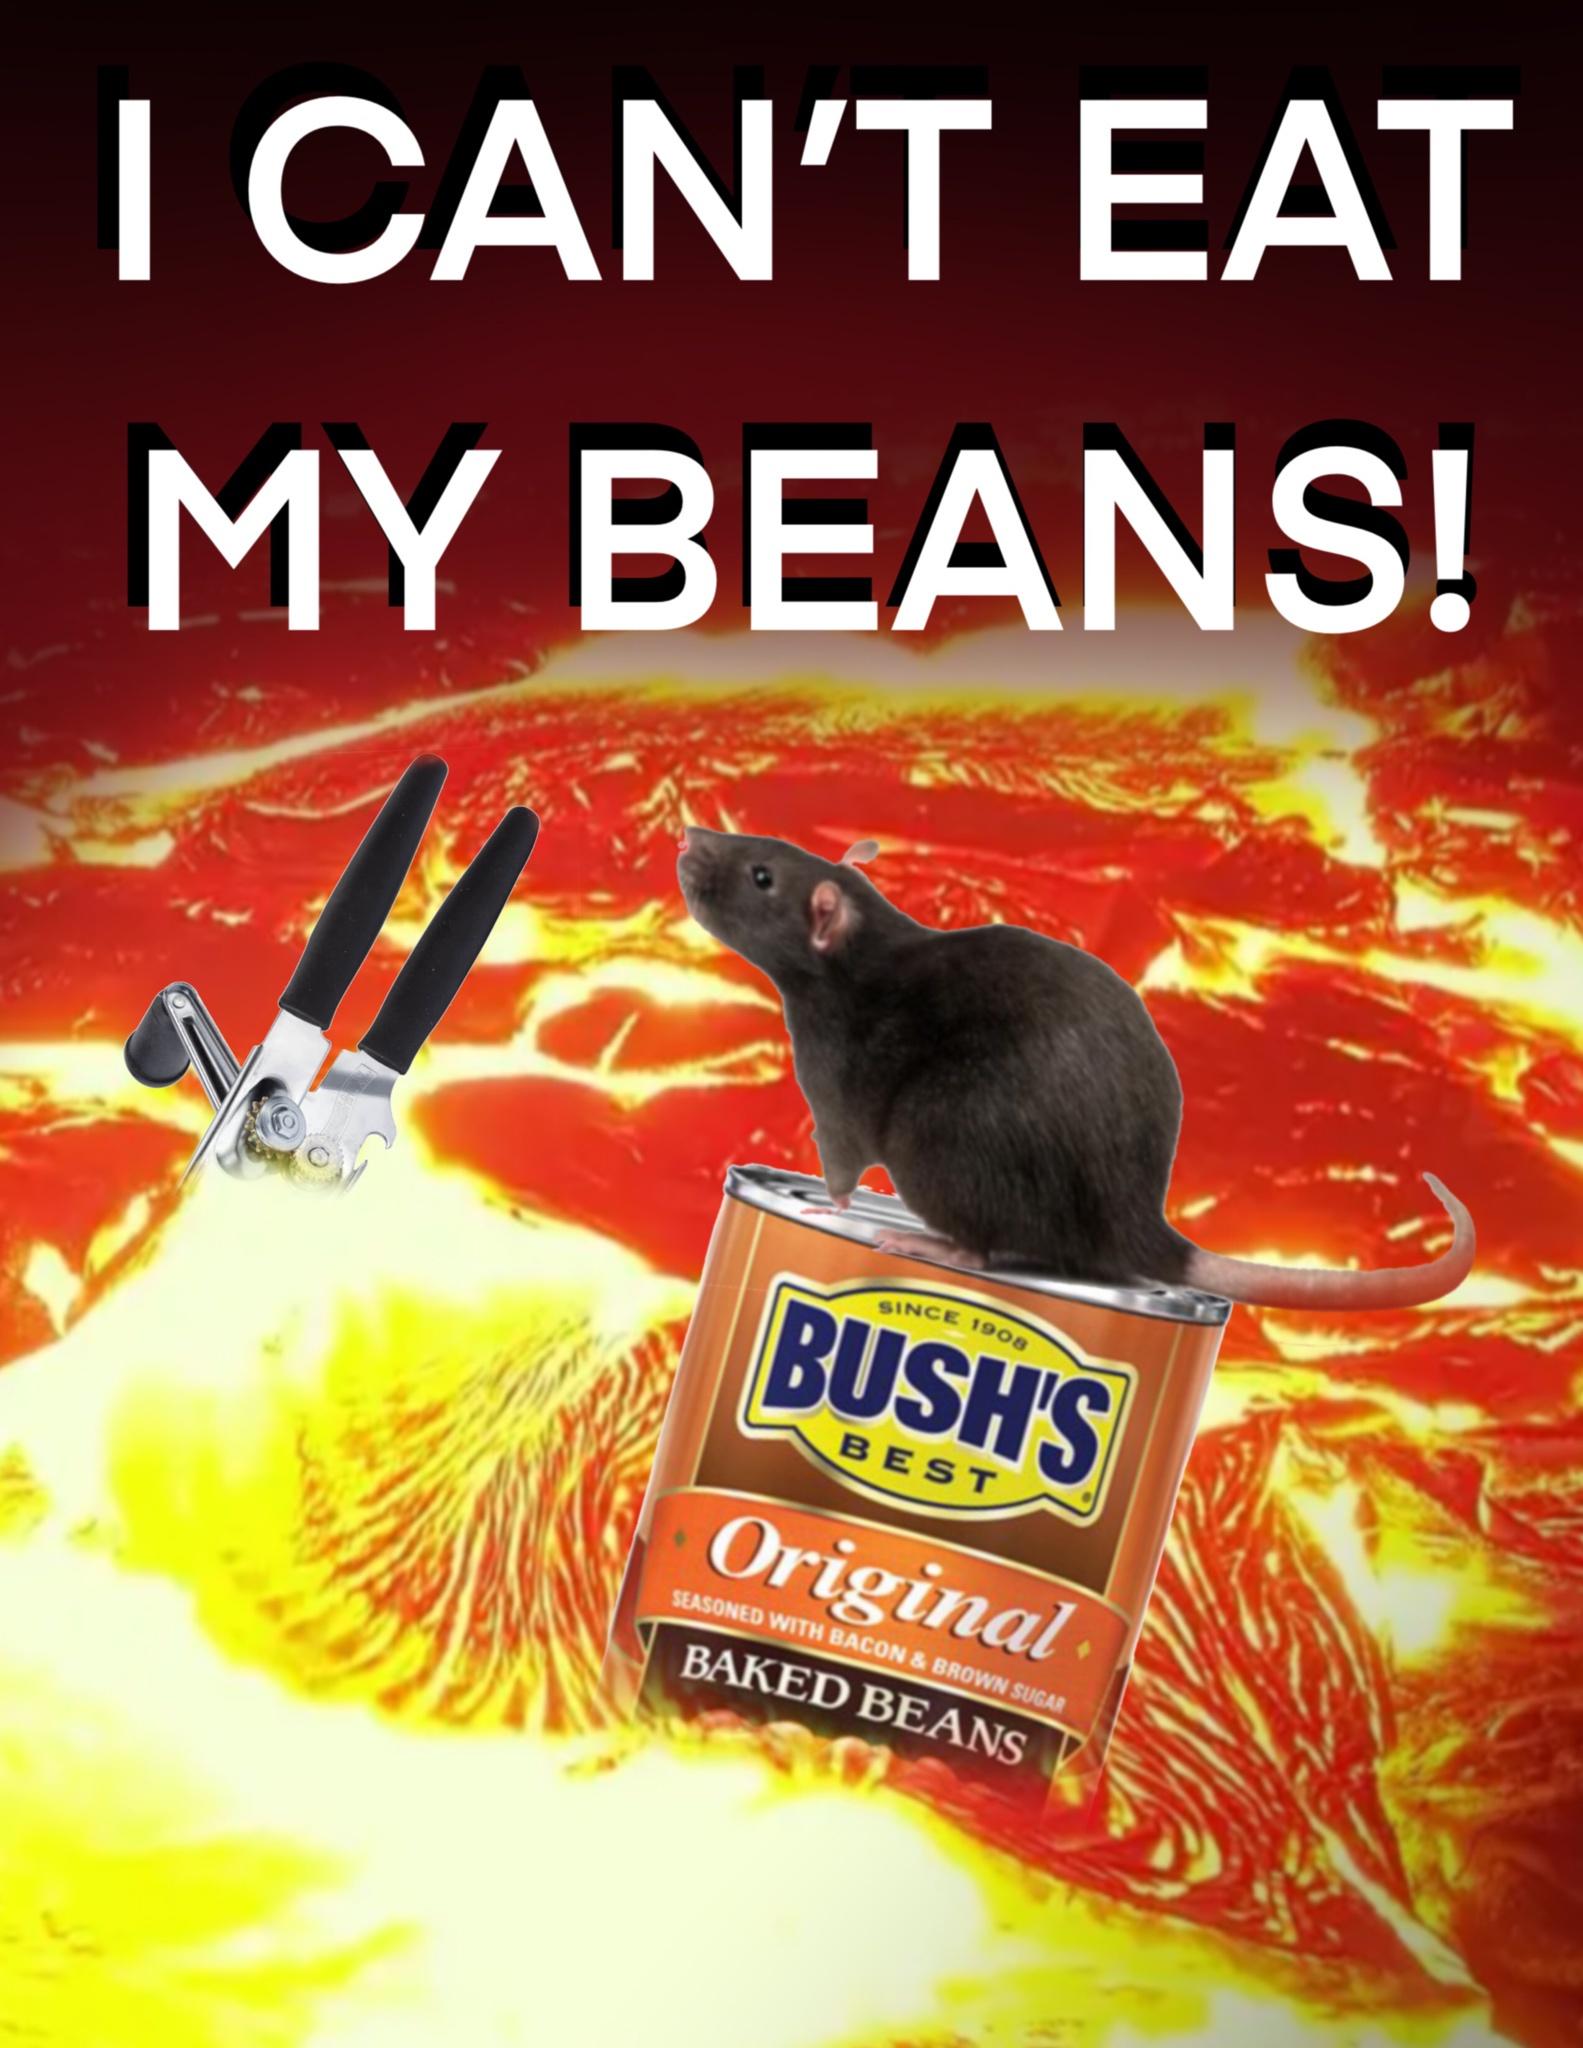 poster - I Can'T Eat My Beans! Since 1908 Bush'S Best Original Seasoned With Bacon & Brown Sugar Baked Beans